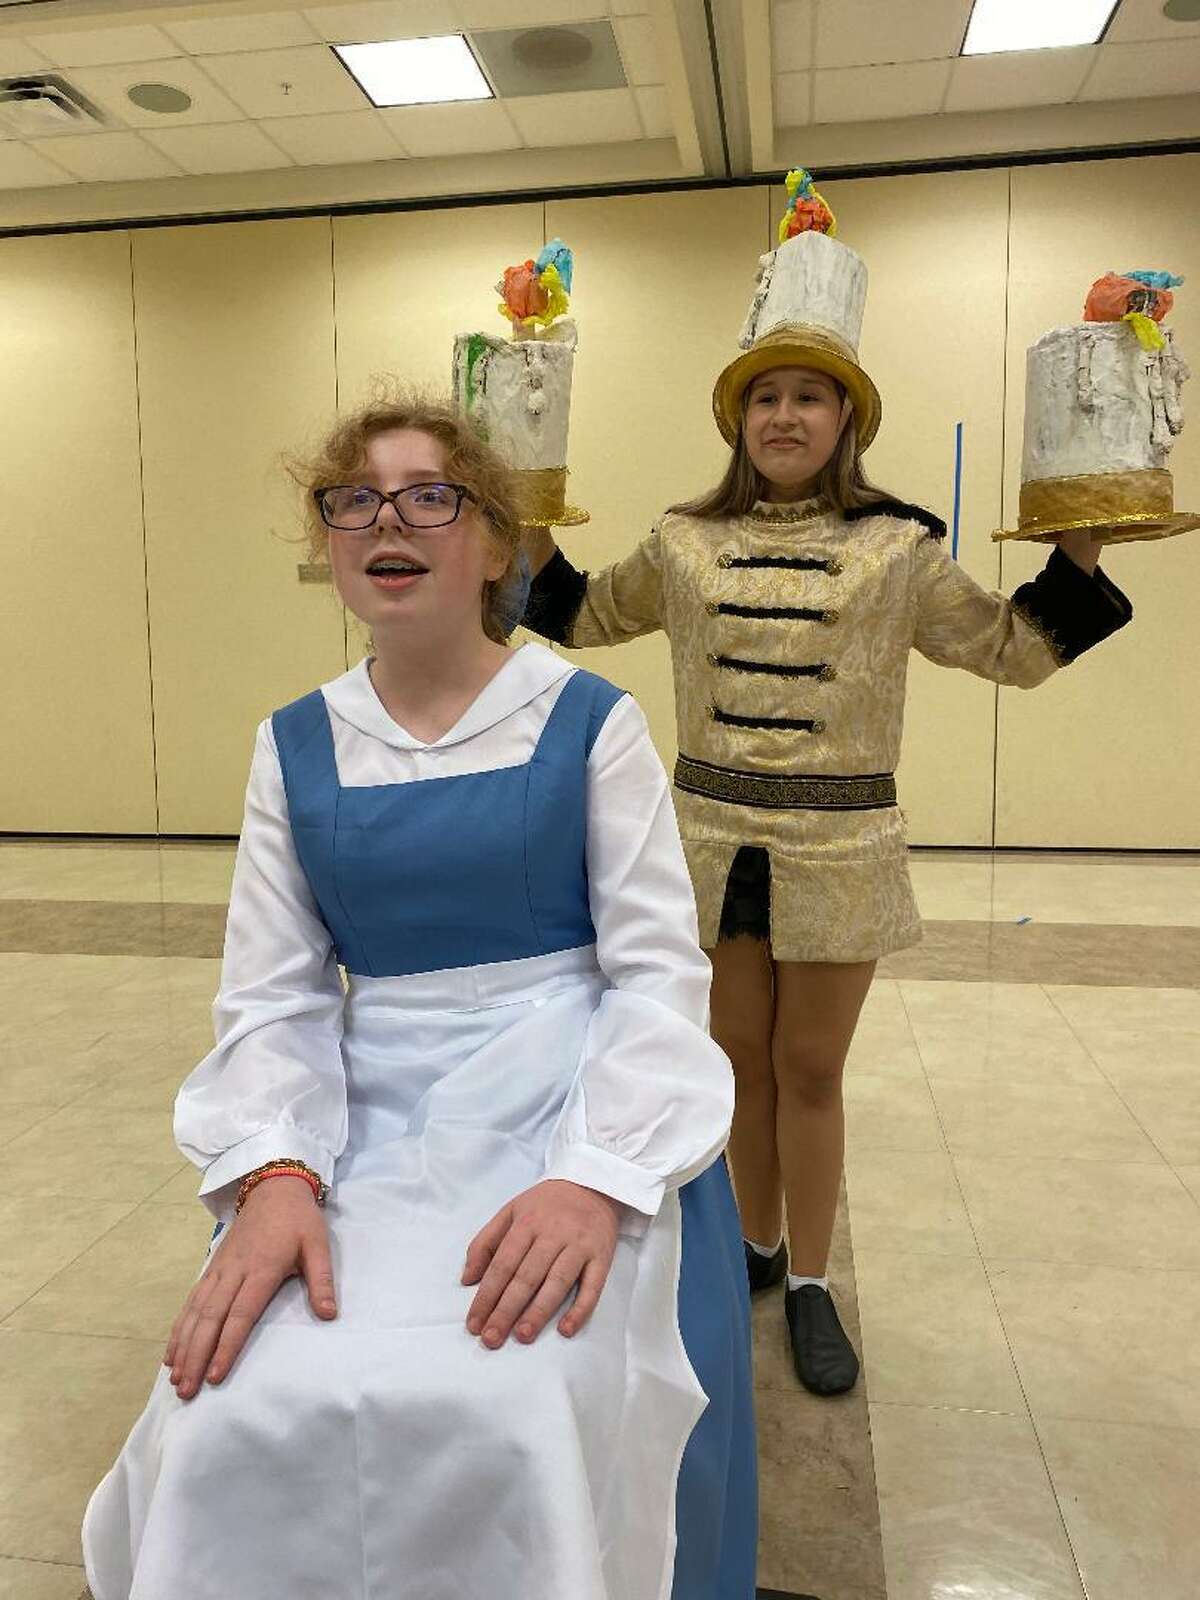 Maria Johnigan as Belle and Catelyn Stensgaard as Lumiere will perform in Kids’ Backporch Productions' “Disney’s Beauty and the Beast JR.” July 29-31 at C.A. Nelson Auditorium at Pearland Junior High West.